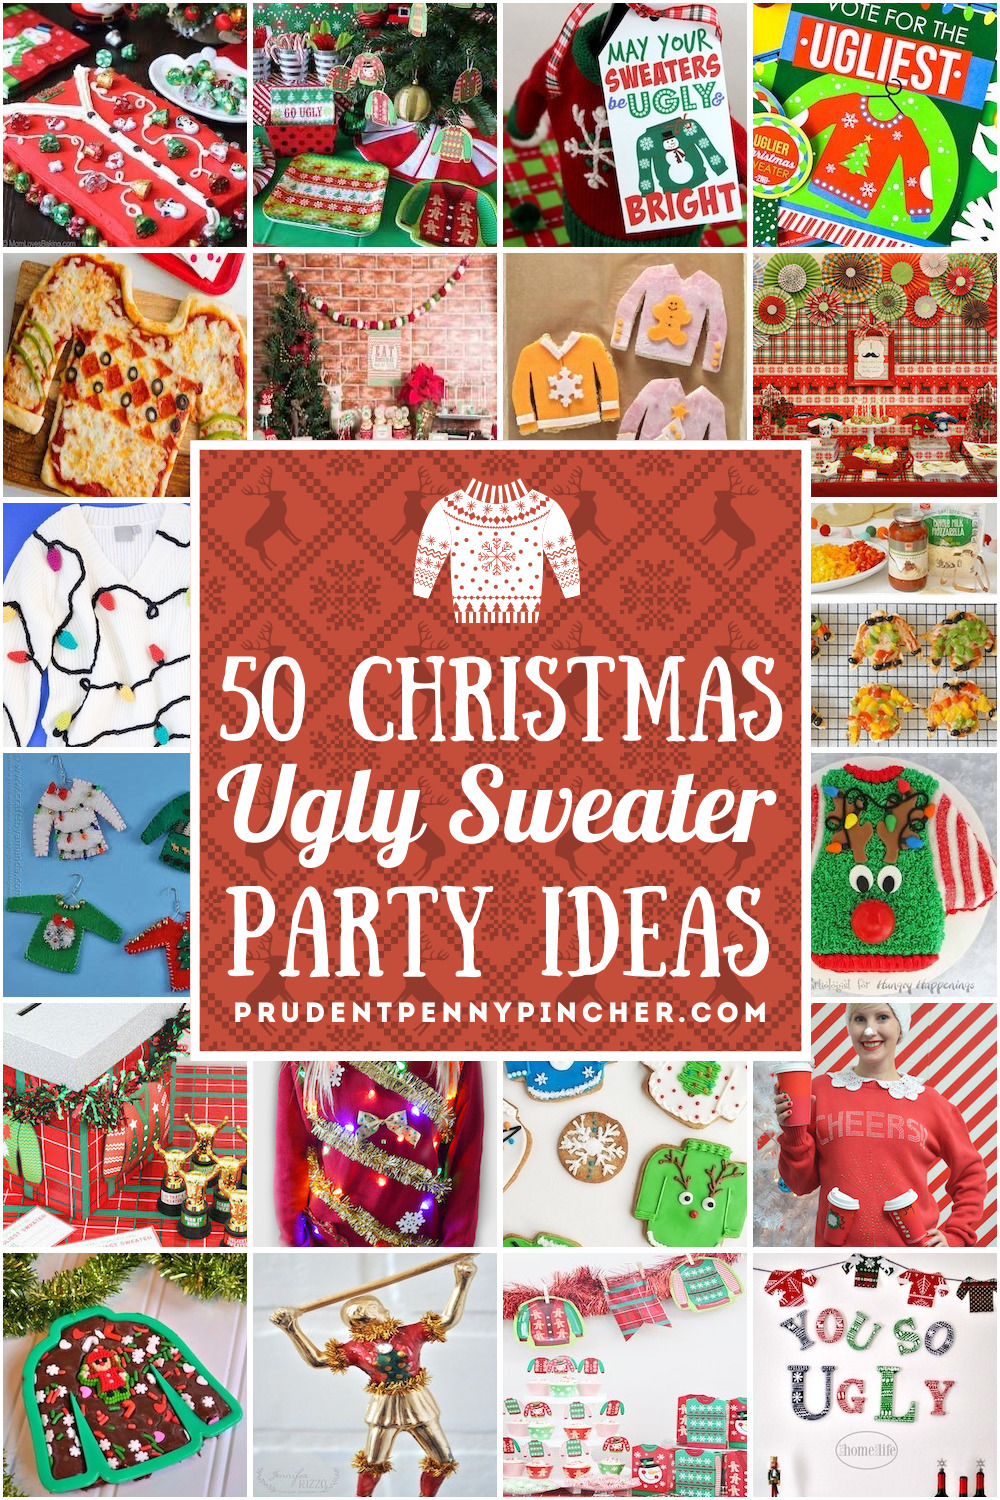 DIY Ugly Sweater Ideas - The Cards We Drew